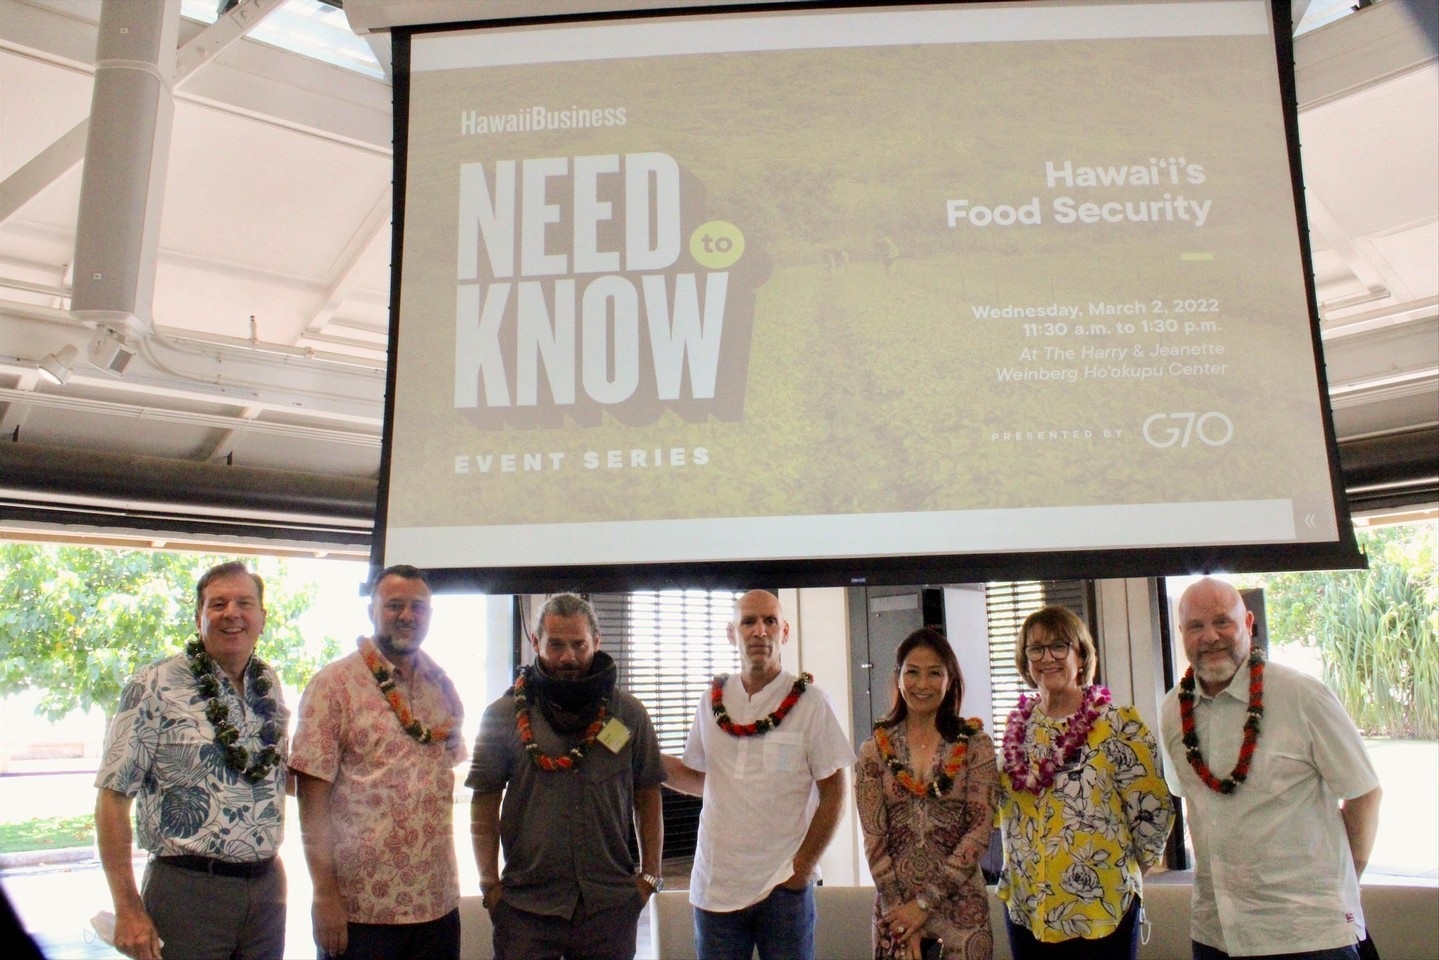 You are currently viewing Chad Buck is as panelist on Food Security and Hawaiʻi’s Supply Chain